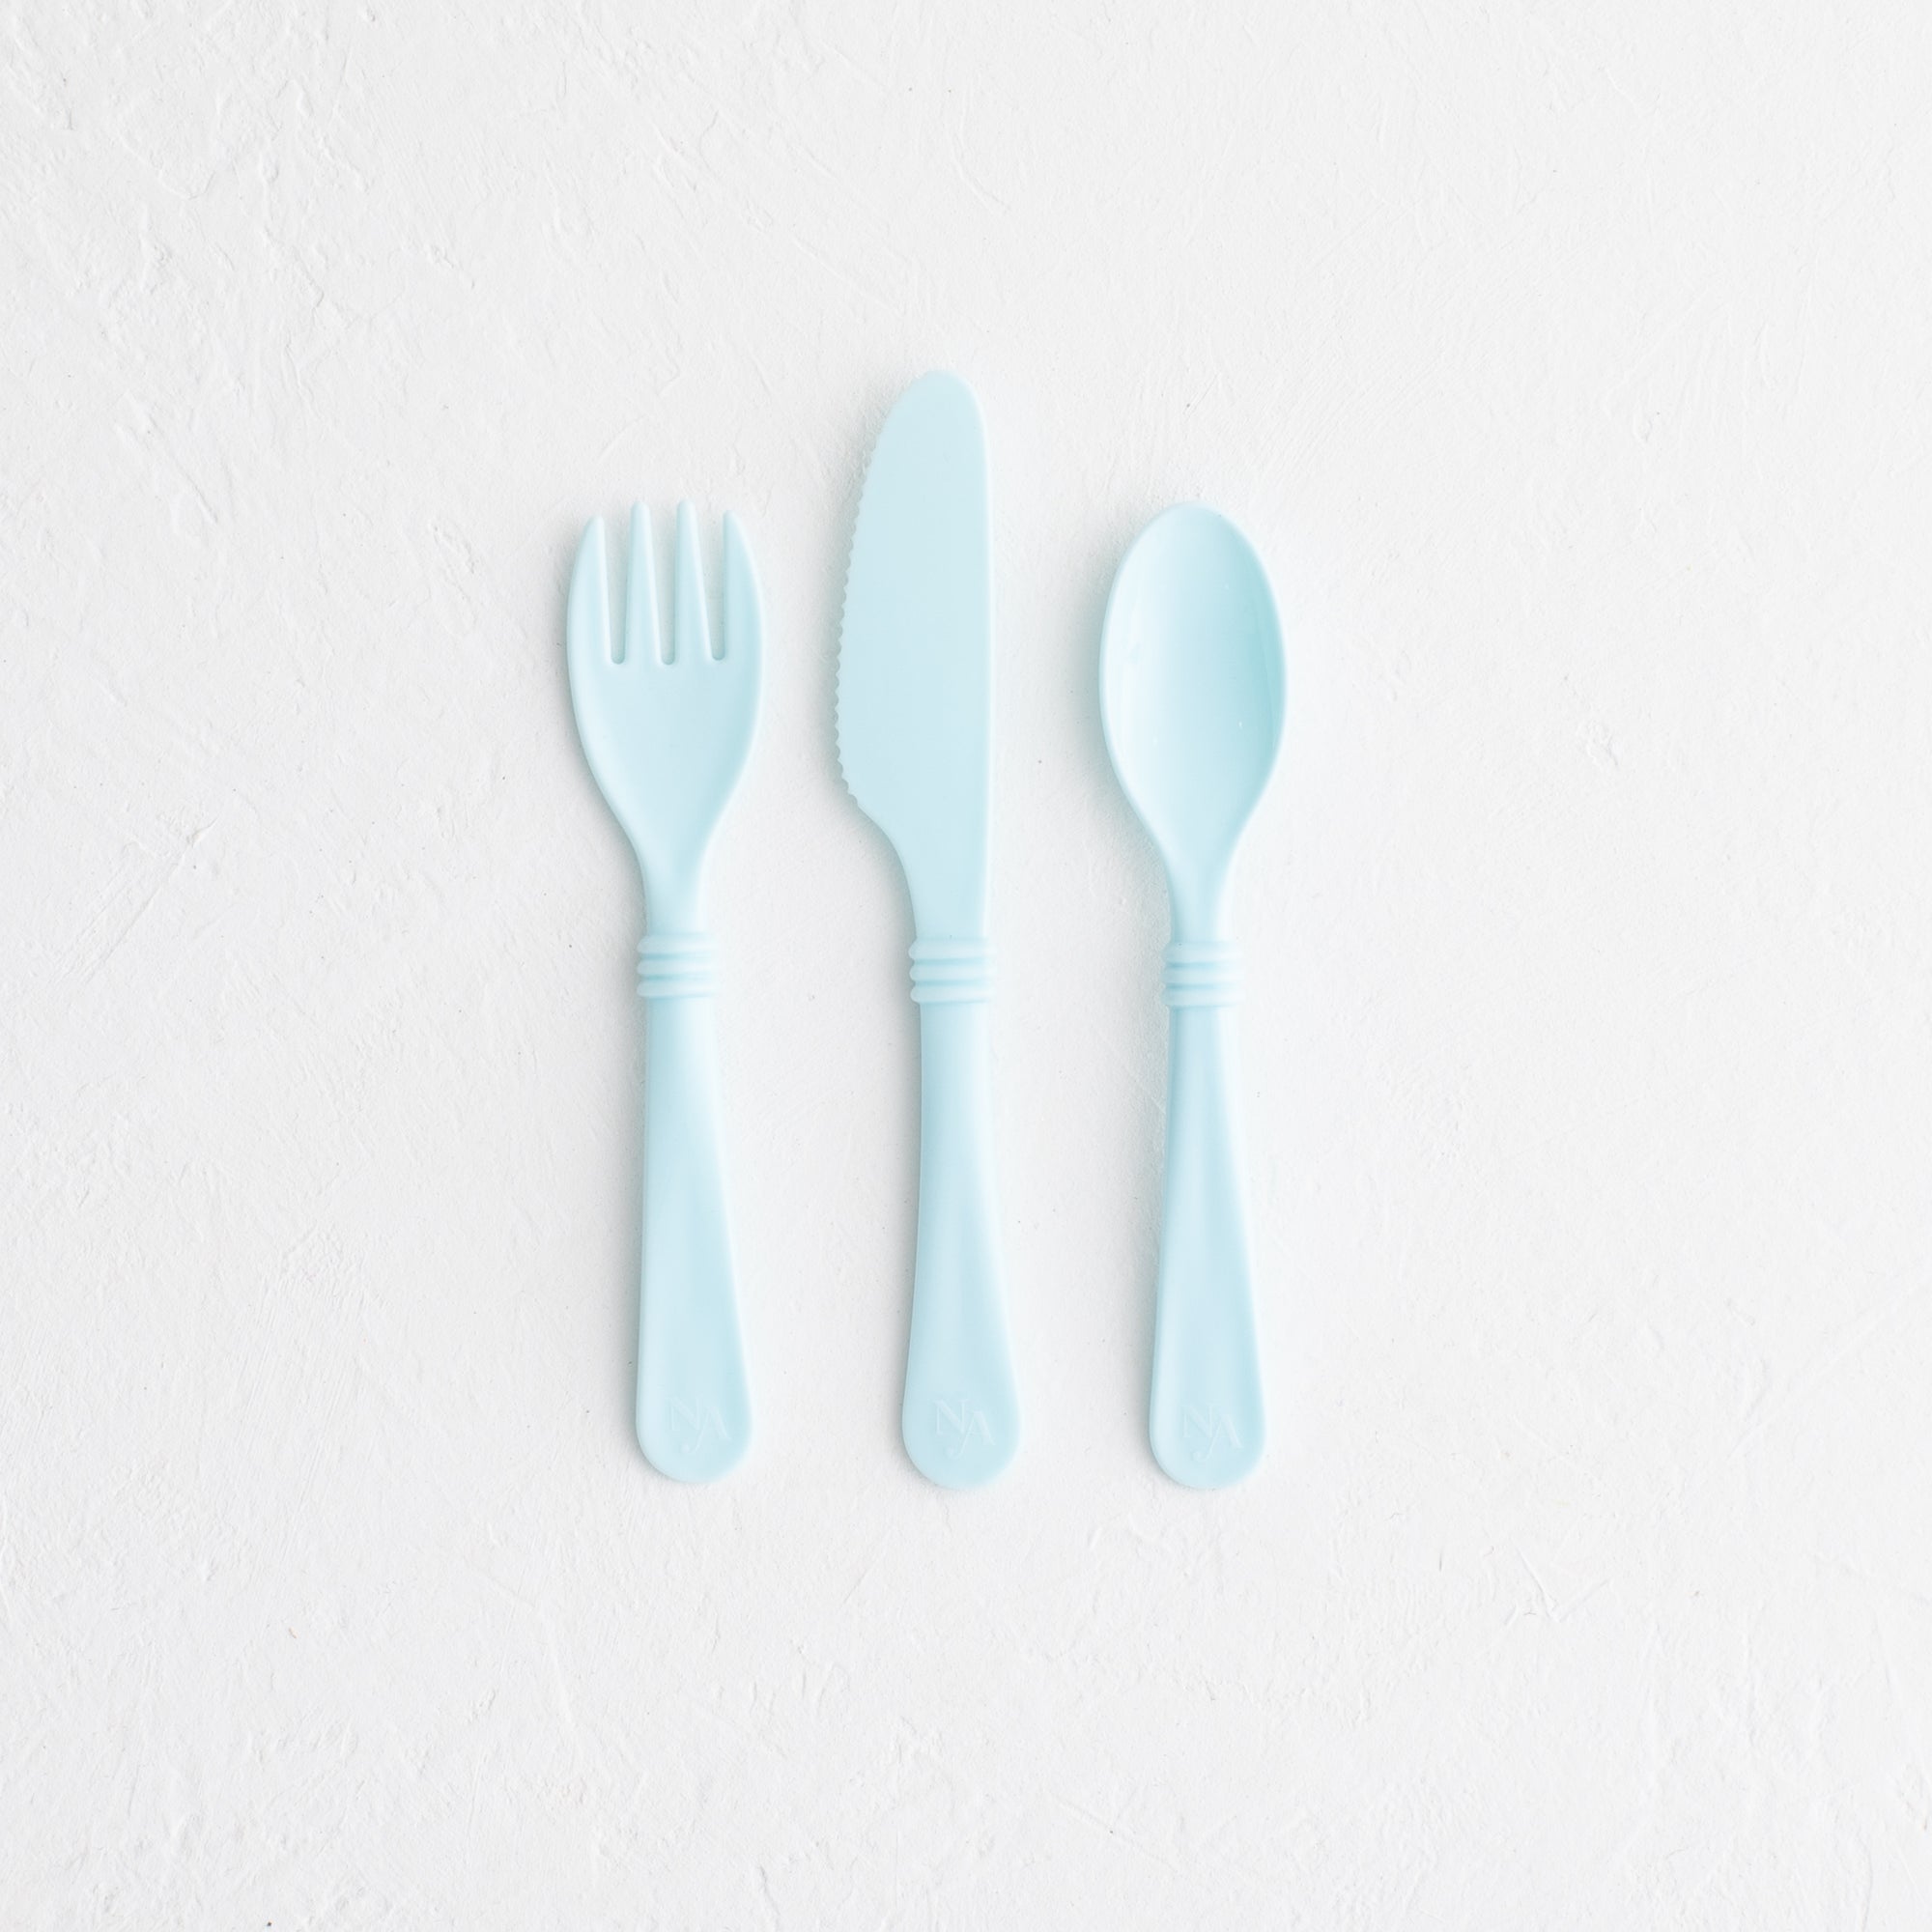 Recycled plastic cutlery set - eco-friendly utensils for sustainable dining - blue set.